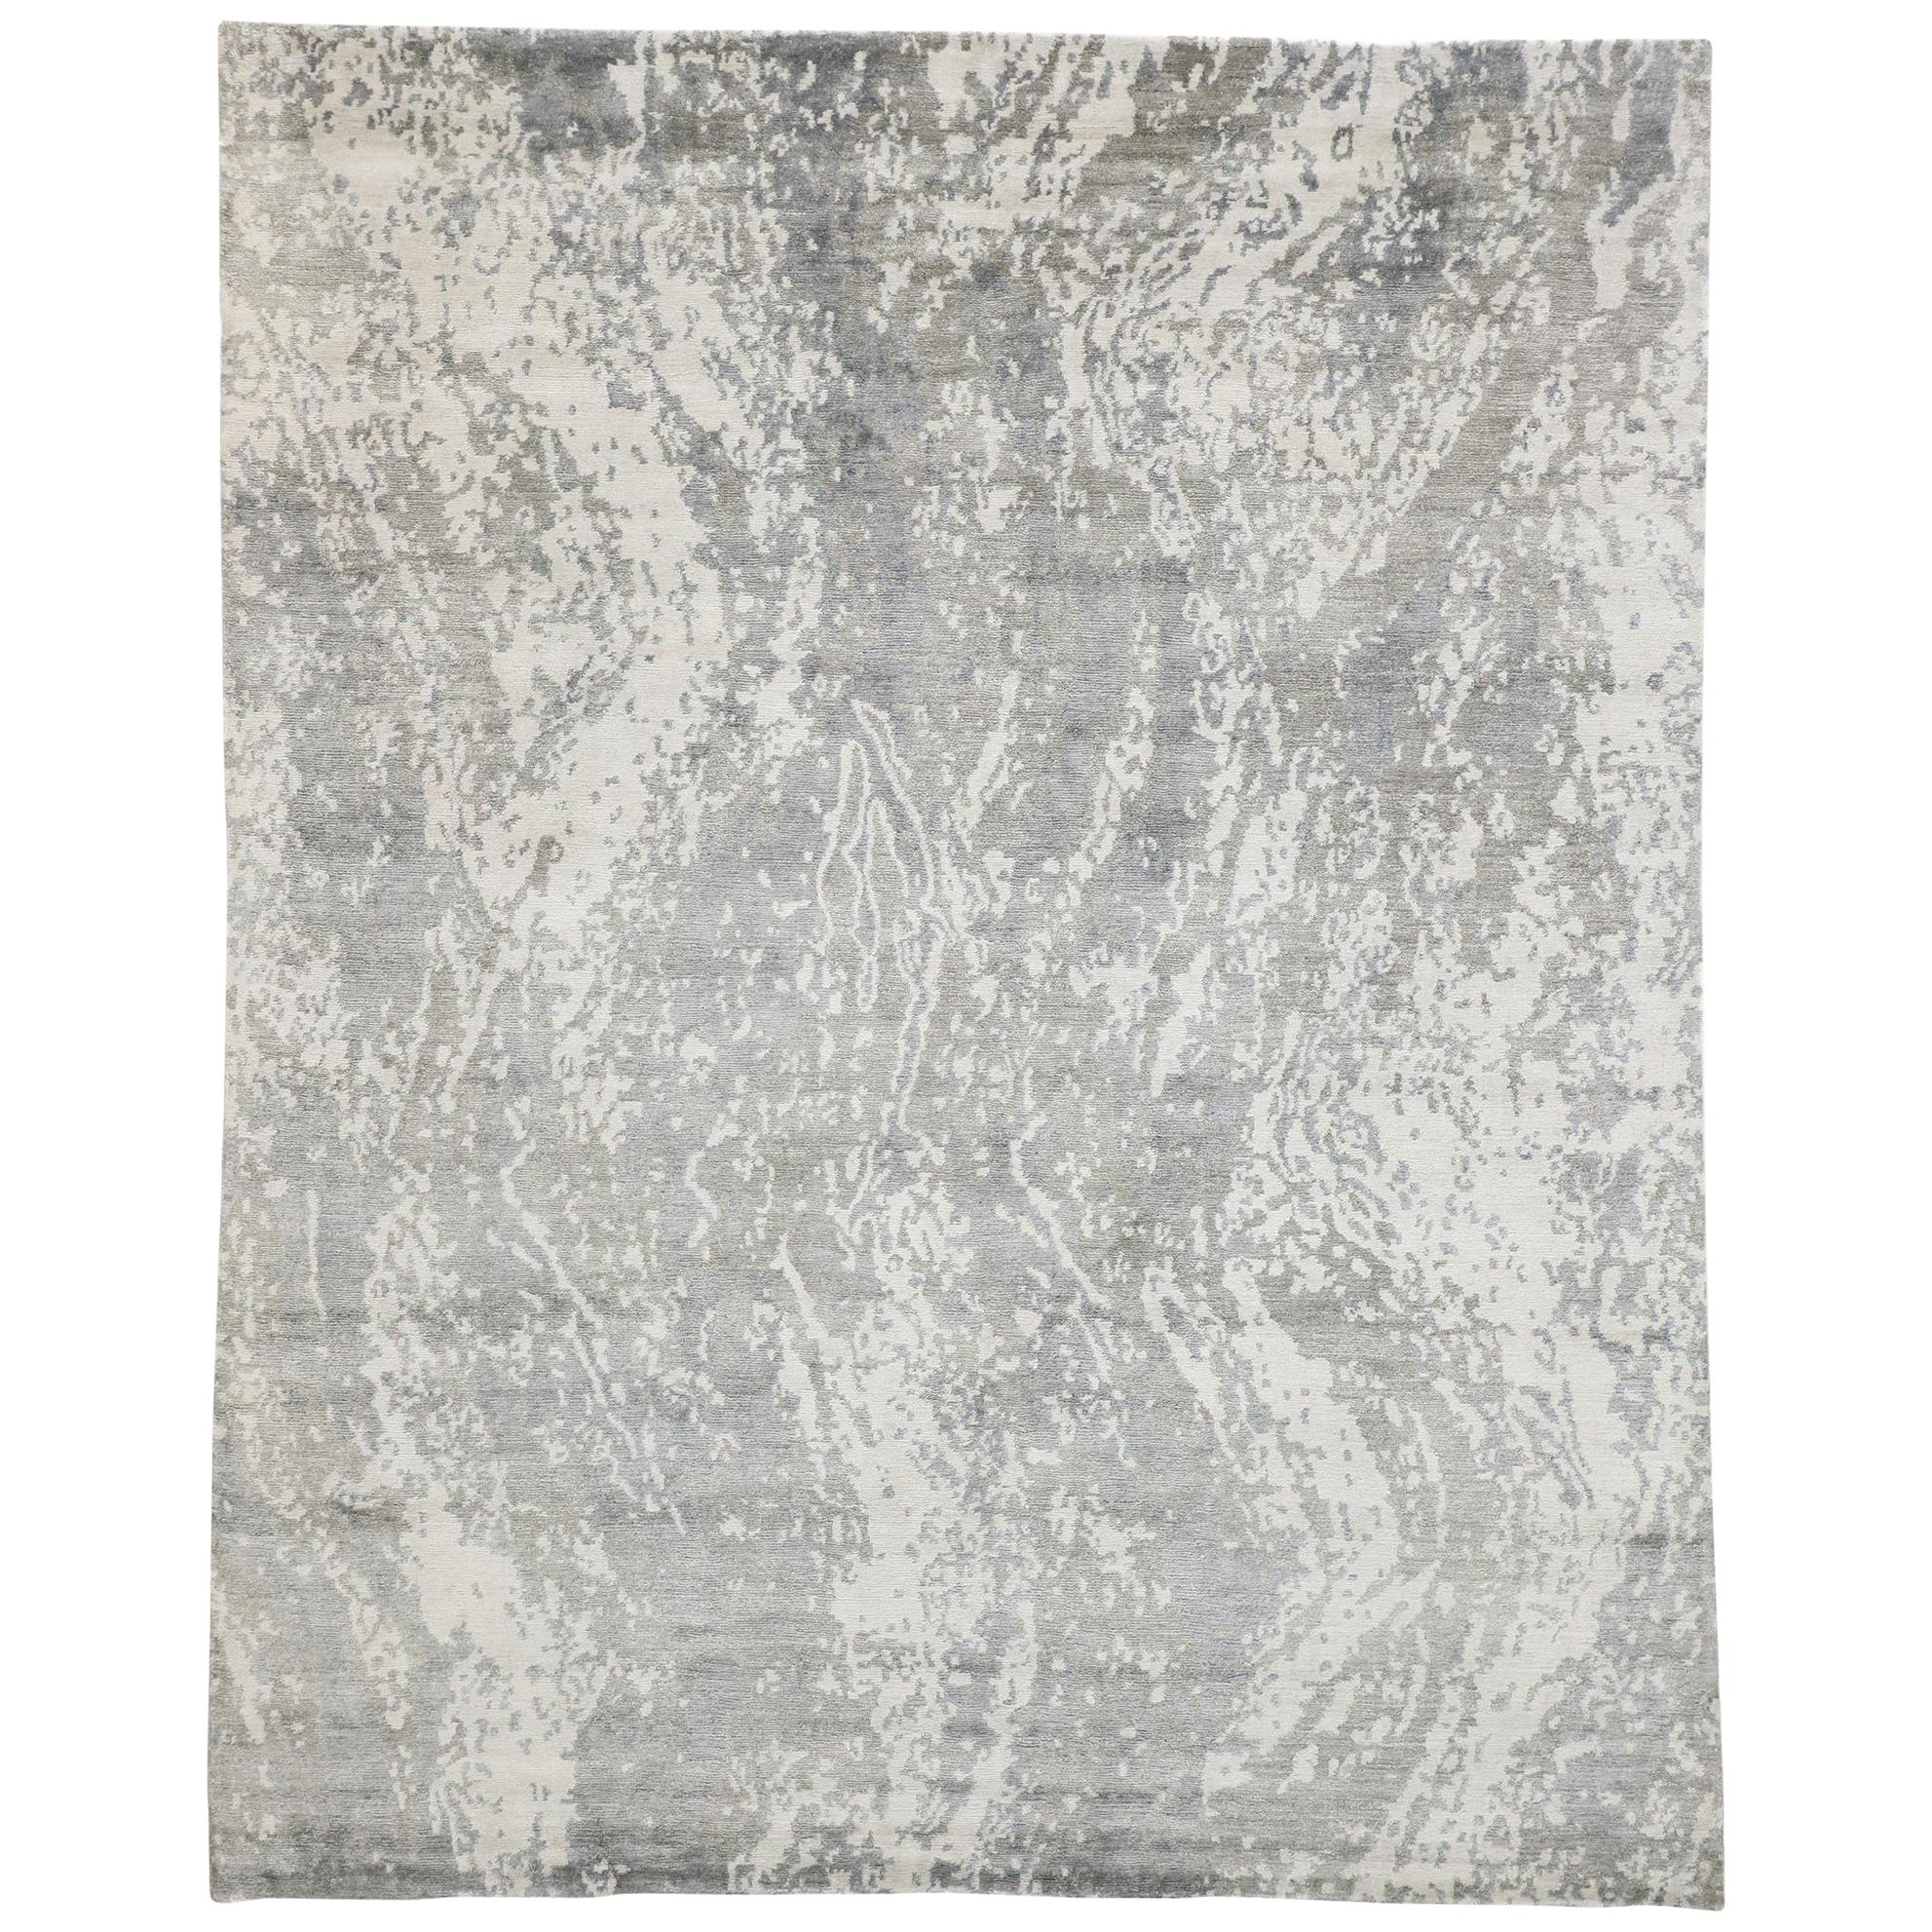 New Contemporary Gray Area Rug with Grunge Art Style